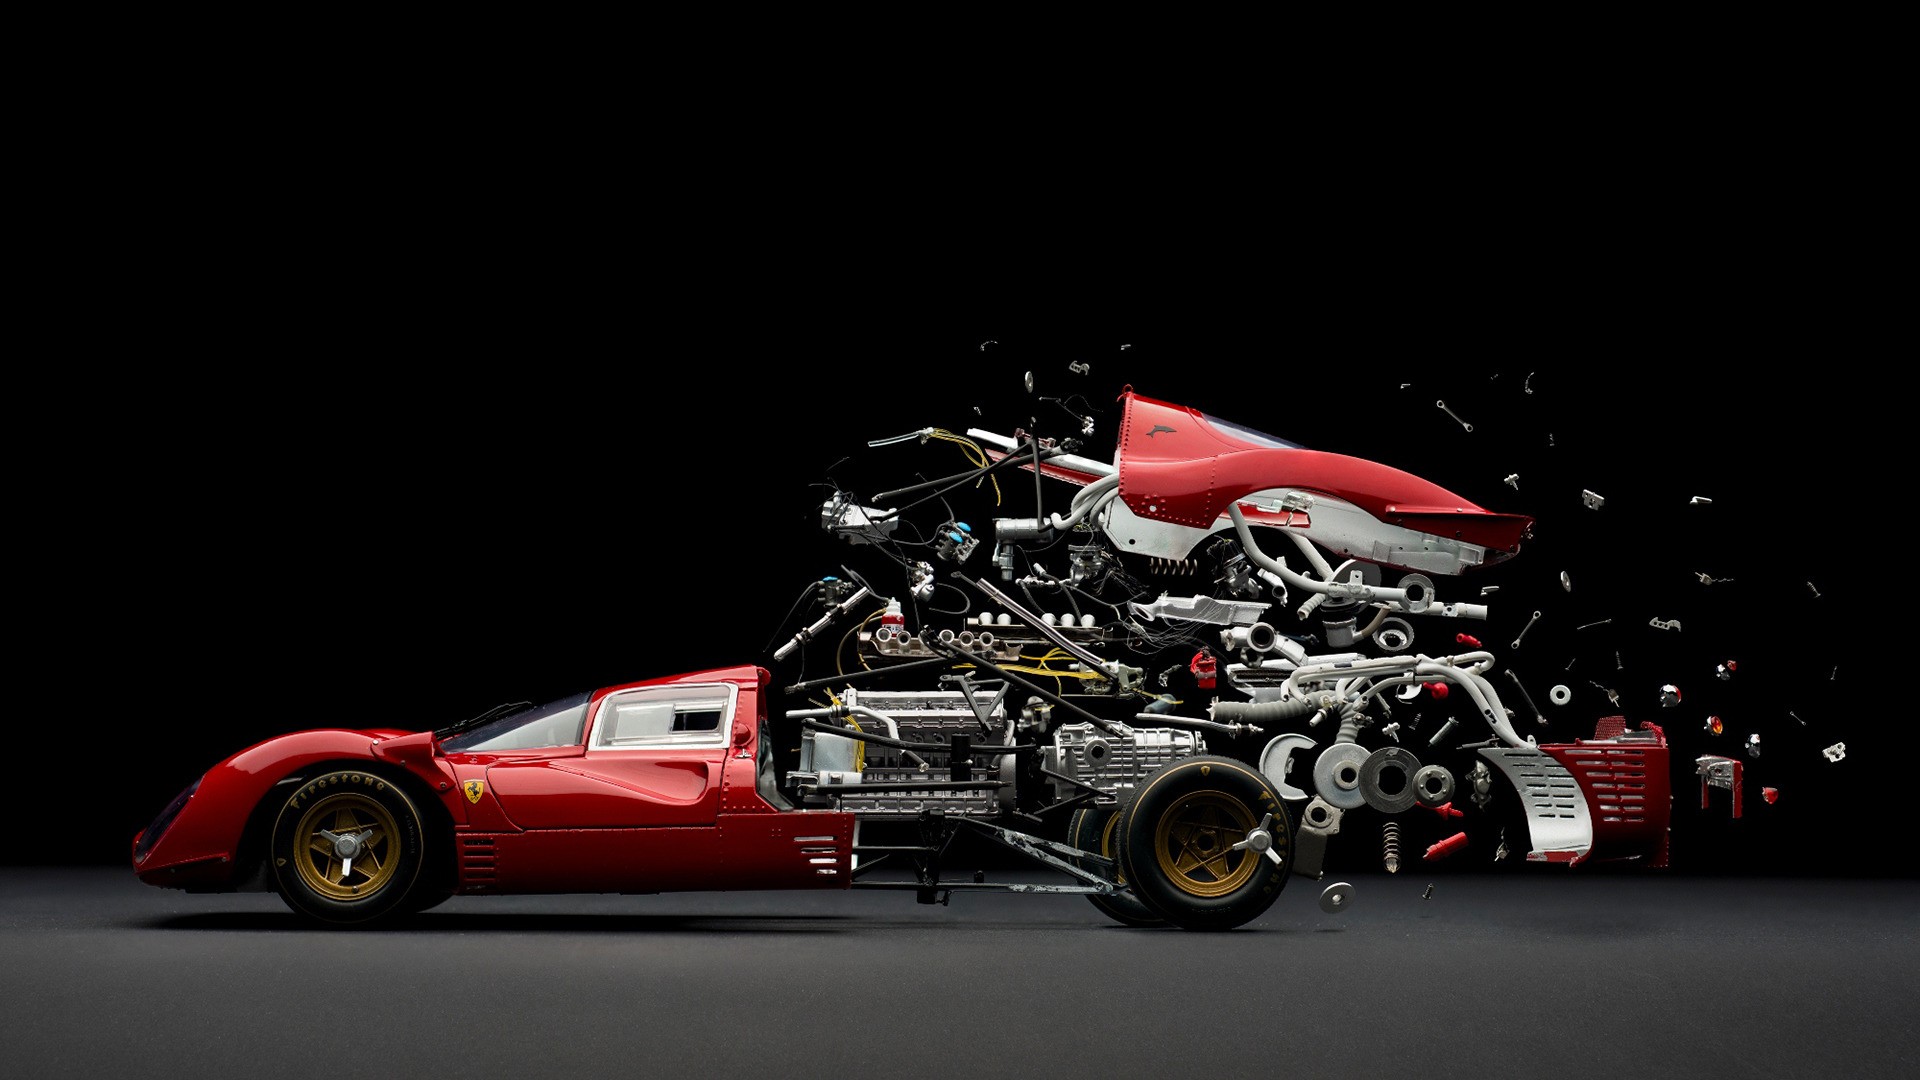 General 1920x1080 sports car Ferrari photo manipulation engine gears motors pipes brakes black background abstract car parts mechanics exploded-view diagram Composite car parts vehicle digital art red cars